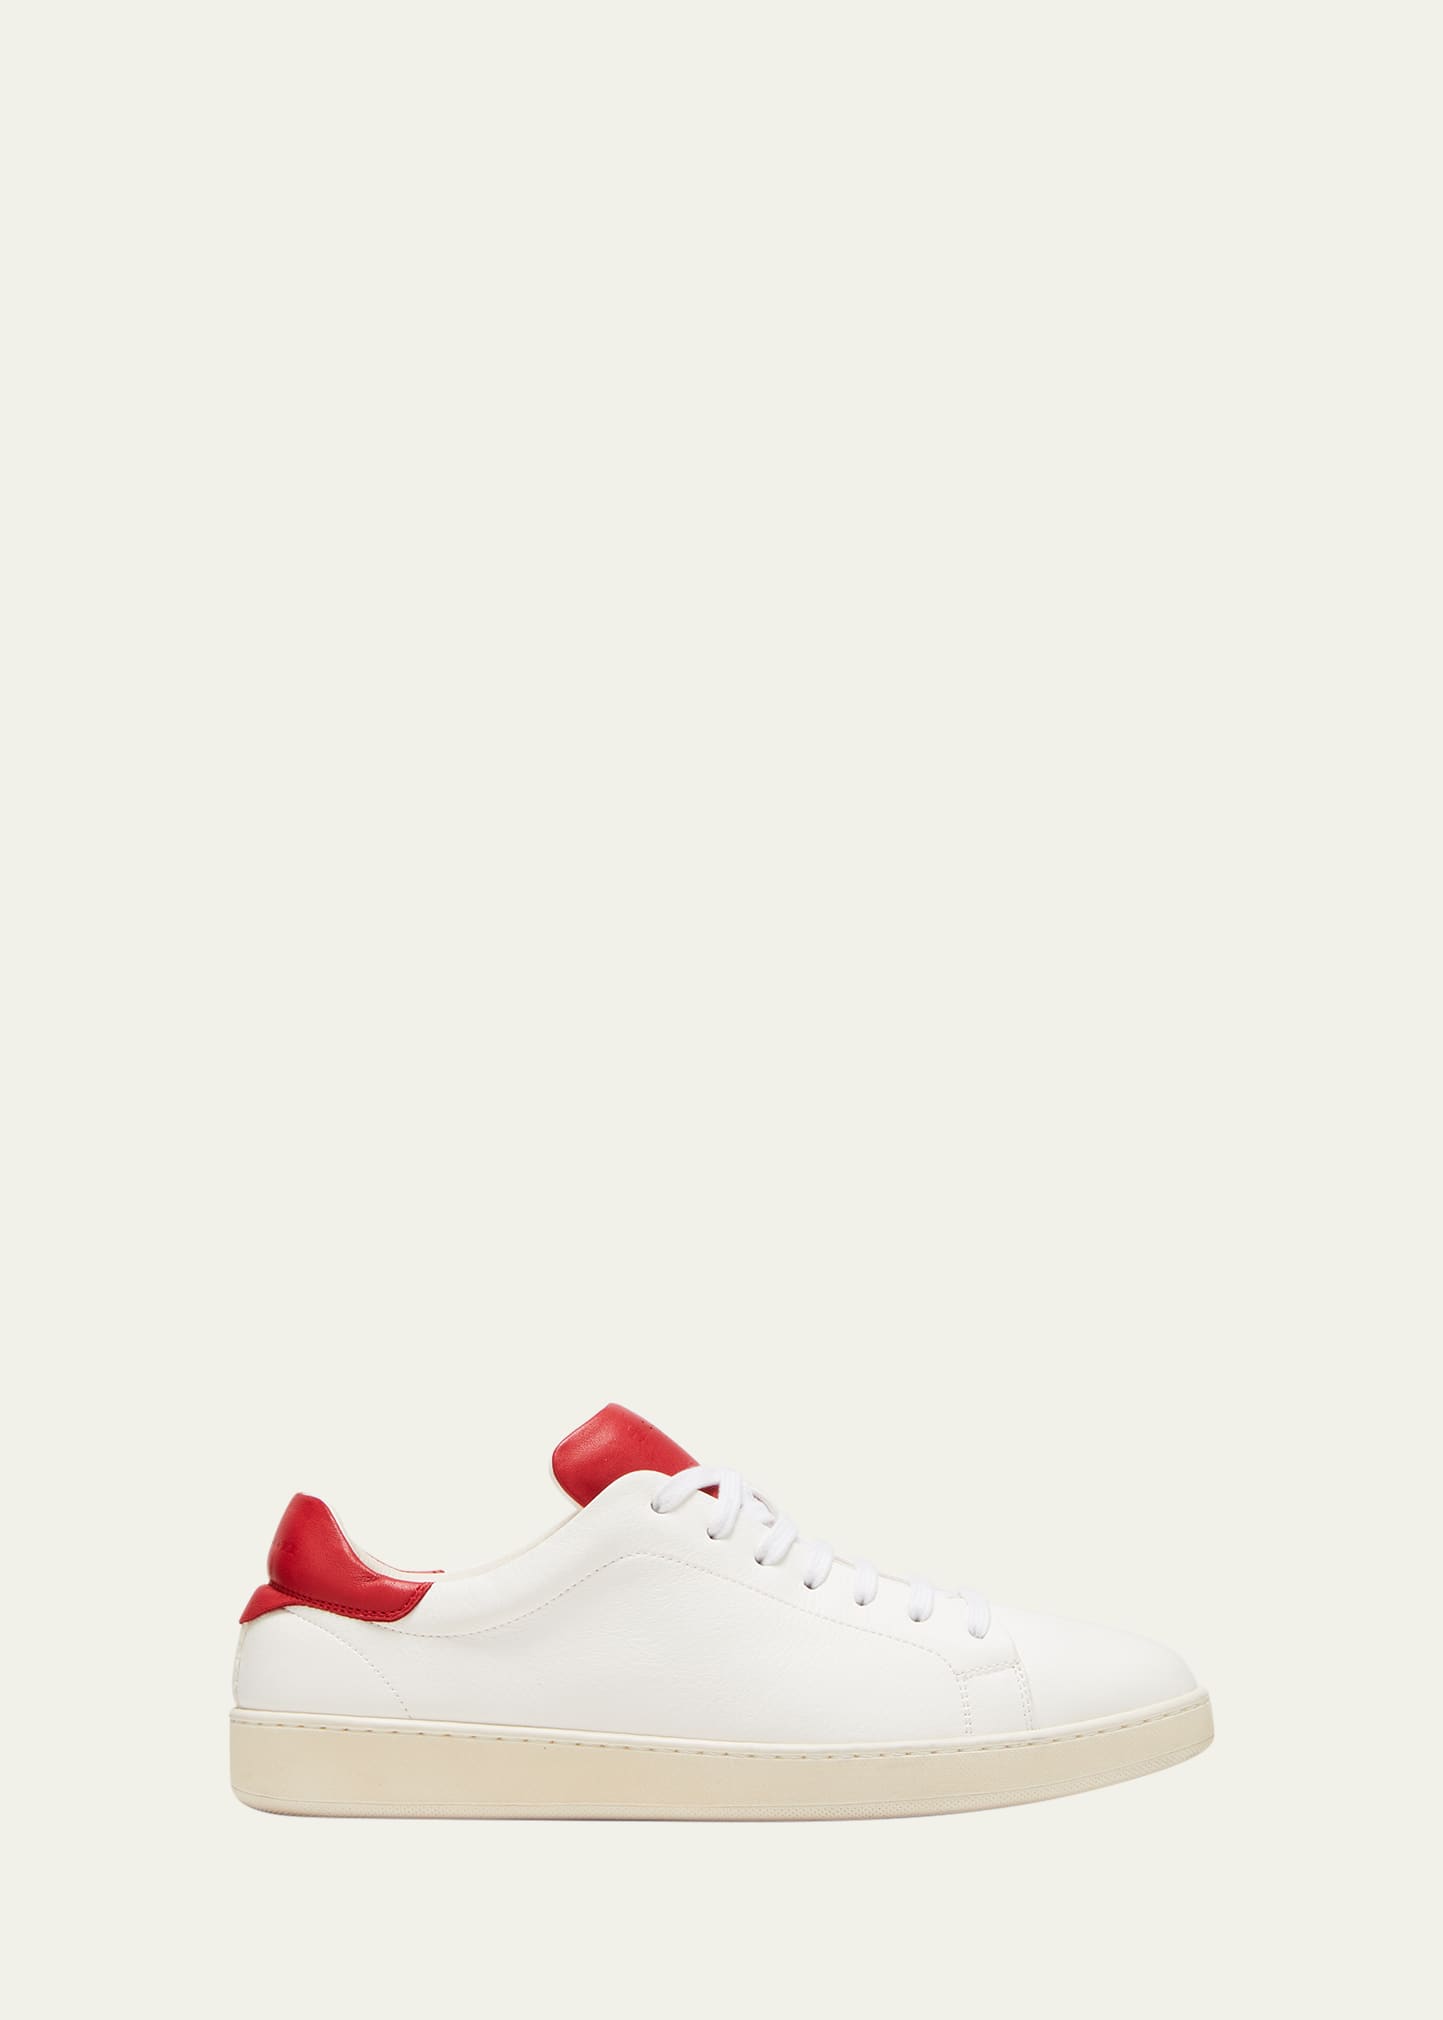 Kiton Men's Bicolor Leather Low-top Sneakers In Cream/red